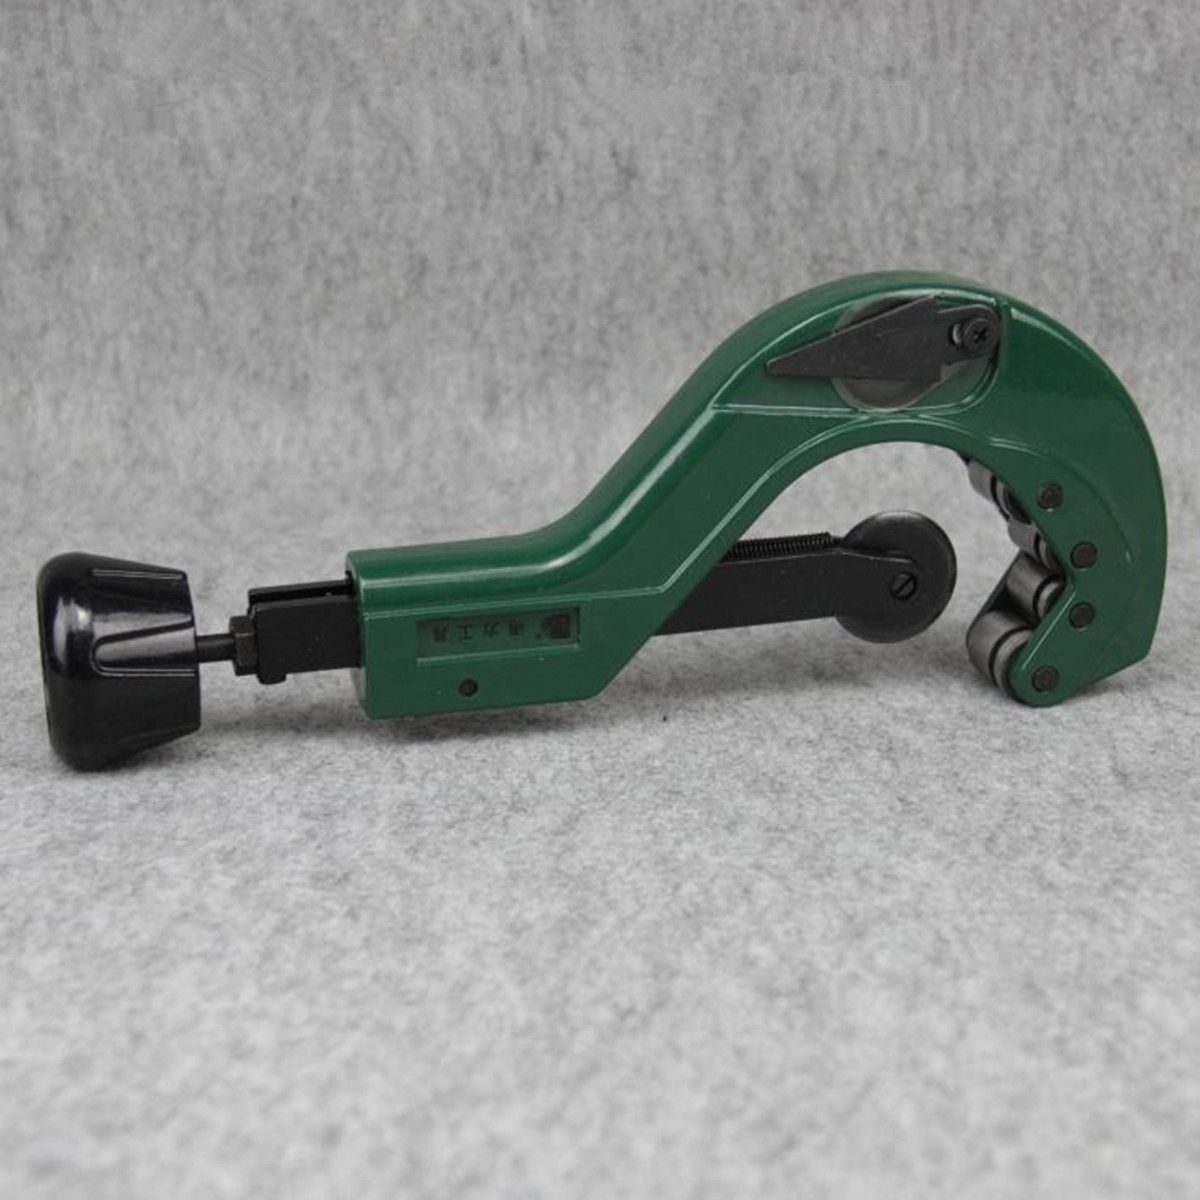 6-64mm-Heavy-Duty-Silverline-Plumbers-Quick-Release-Tube-Pipe-Cutter-Tool-1041481